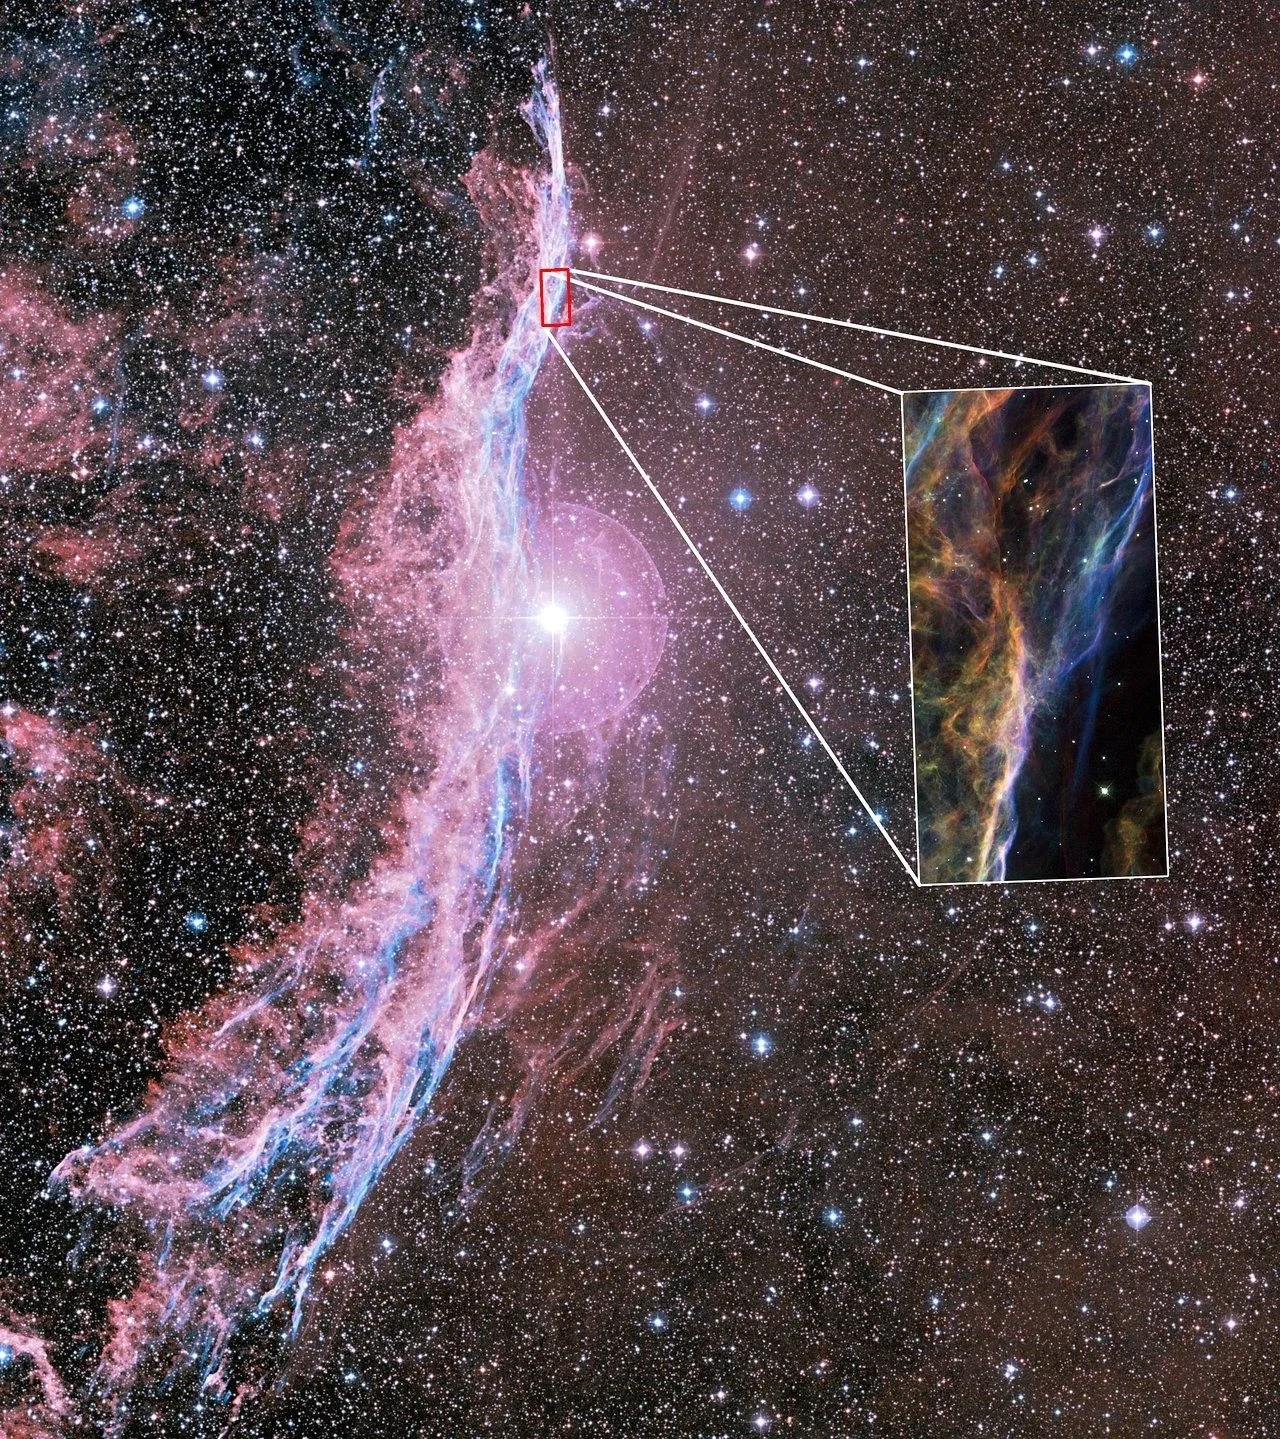 Large pink cloud of dust and gas which form the cygnus loop, in the center a bright white star along with an inset image showing a closer up view taken by Hubble.